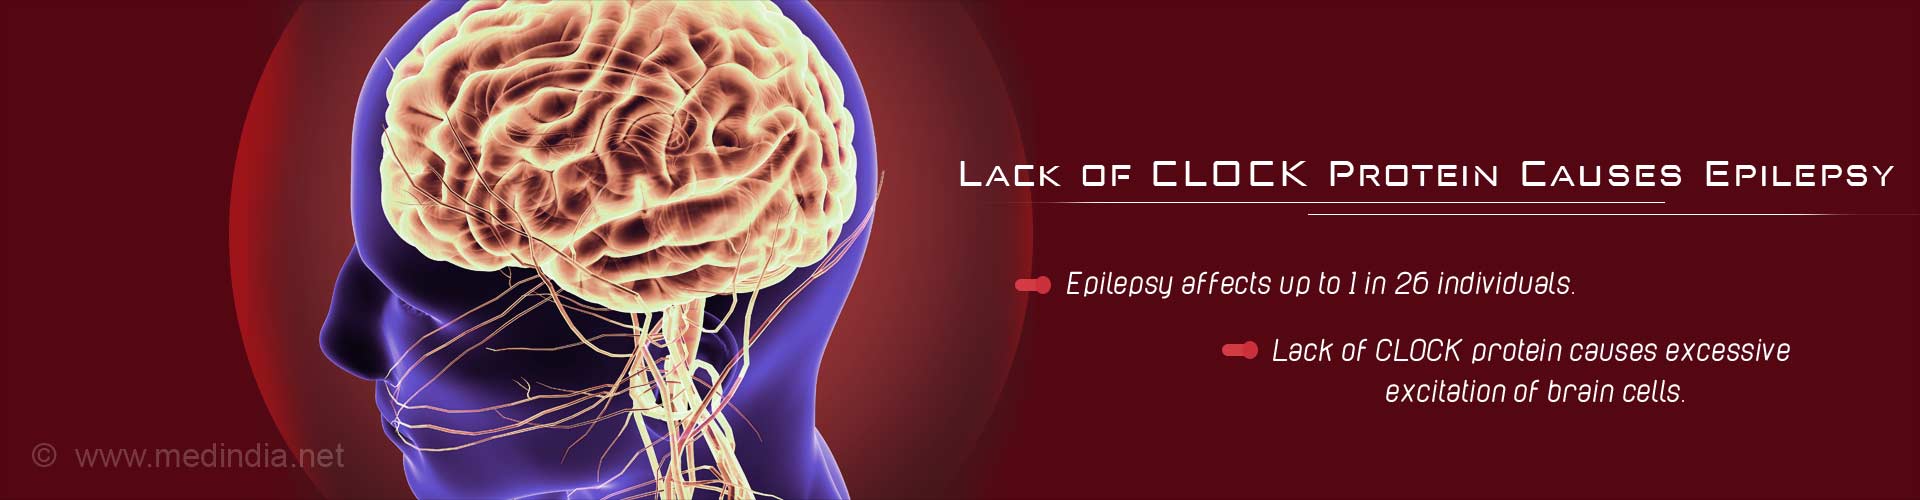 Lack of clock protein cause epilepsy
- Epilepsy affects upto 1 in 26 individuals
- Lack of CLOCK protein causes excessive excitation of brain cells